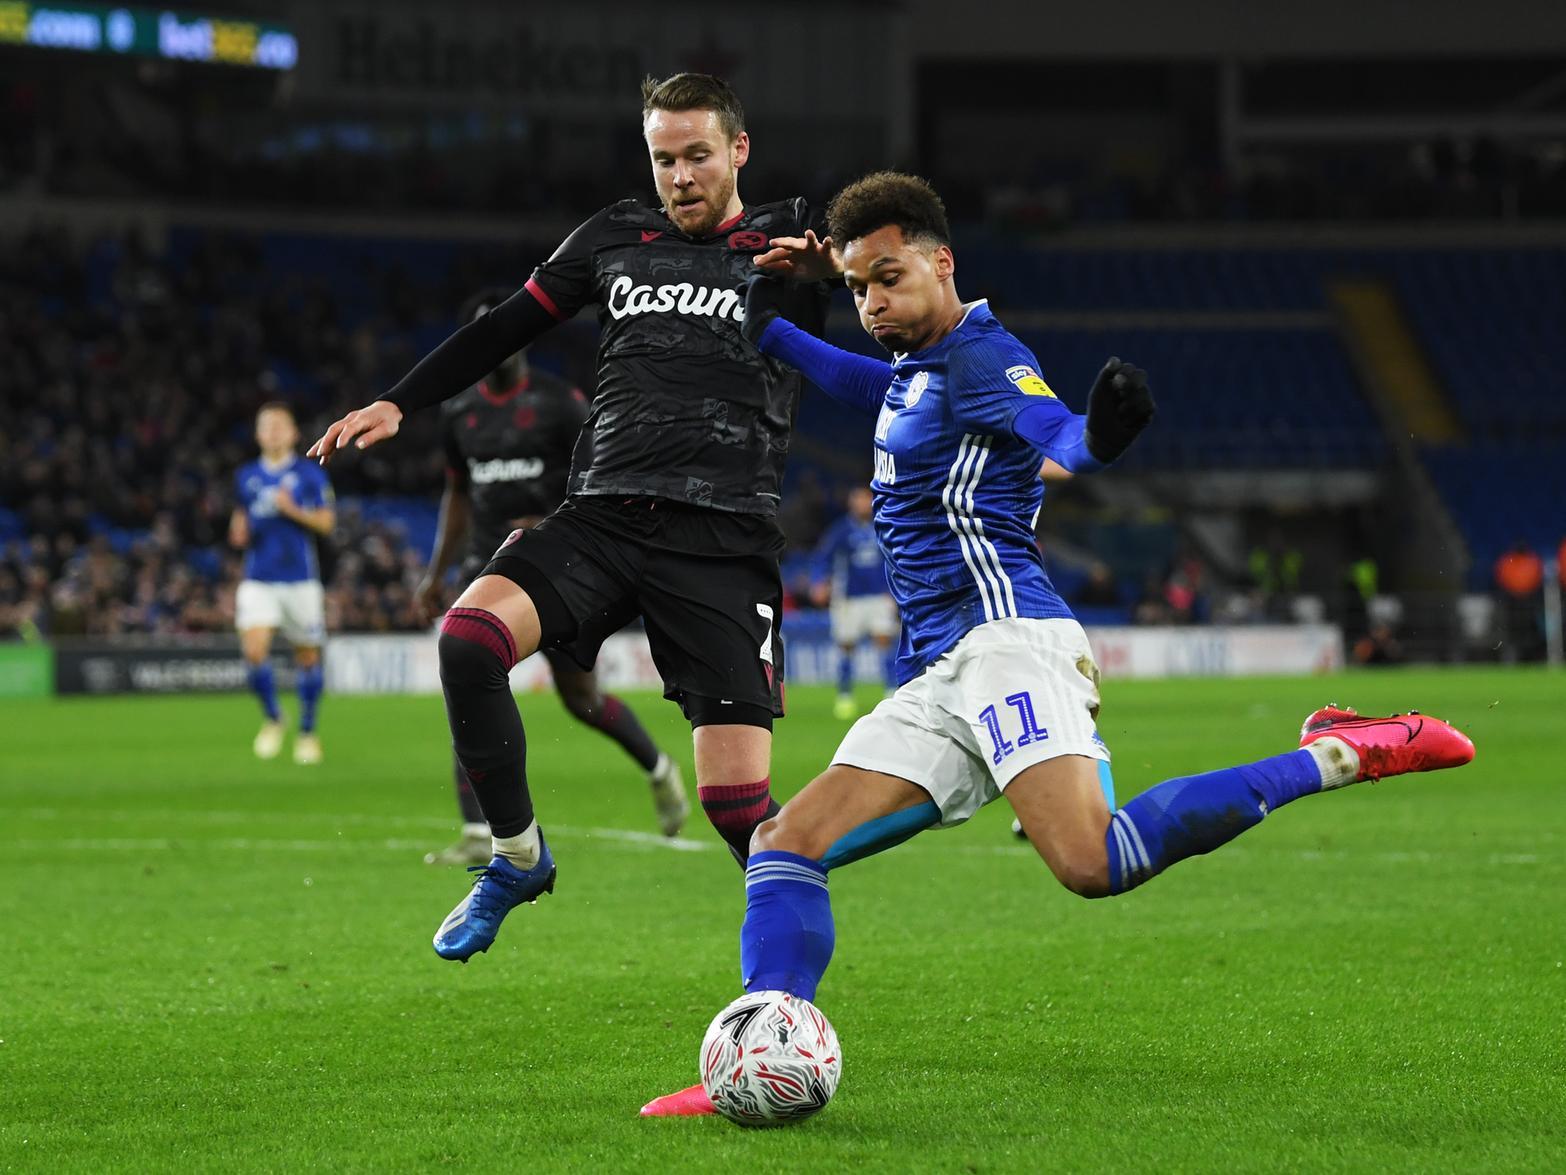 Celtic are said to be plotting a summer raid for Cardiff City winger Josh Murphy, who joined the Welsh side for around 11m from Norwich City back in 2018. (Wales Online)